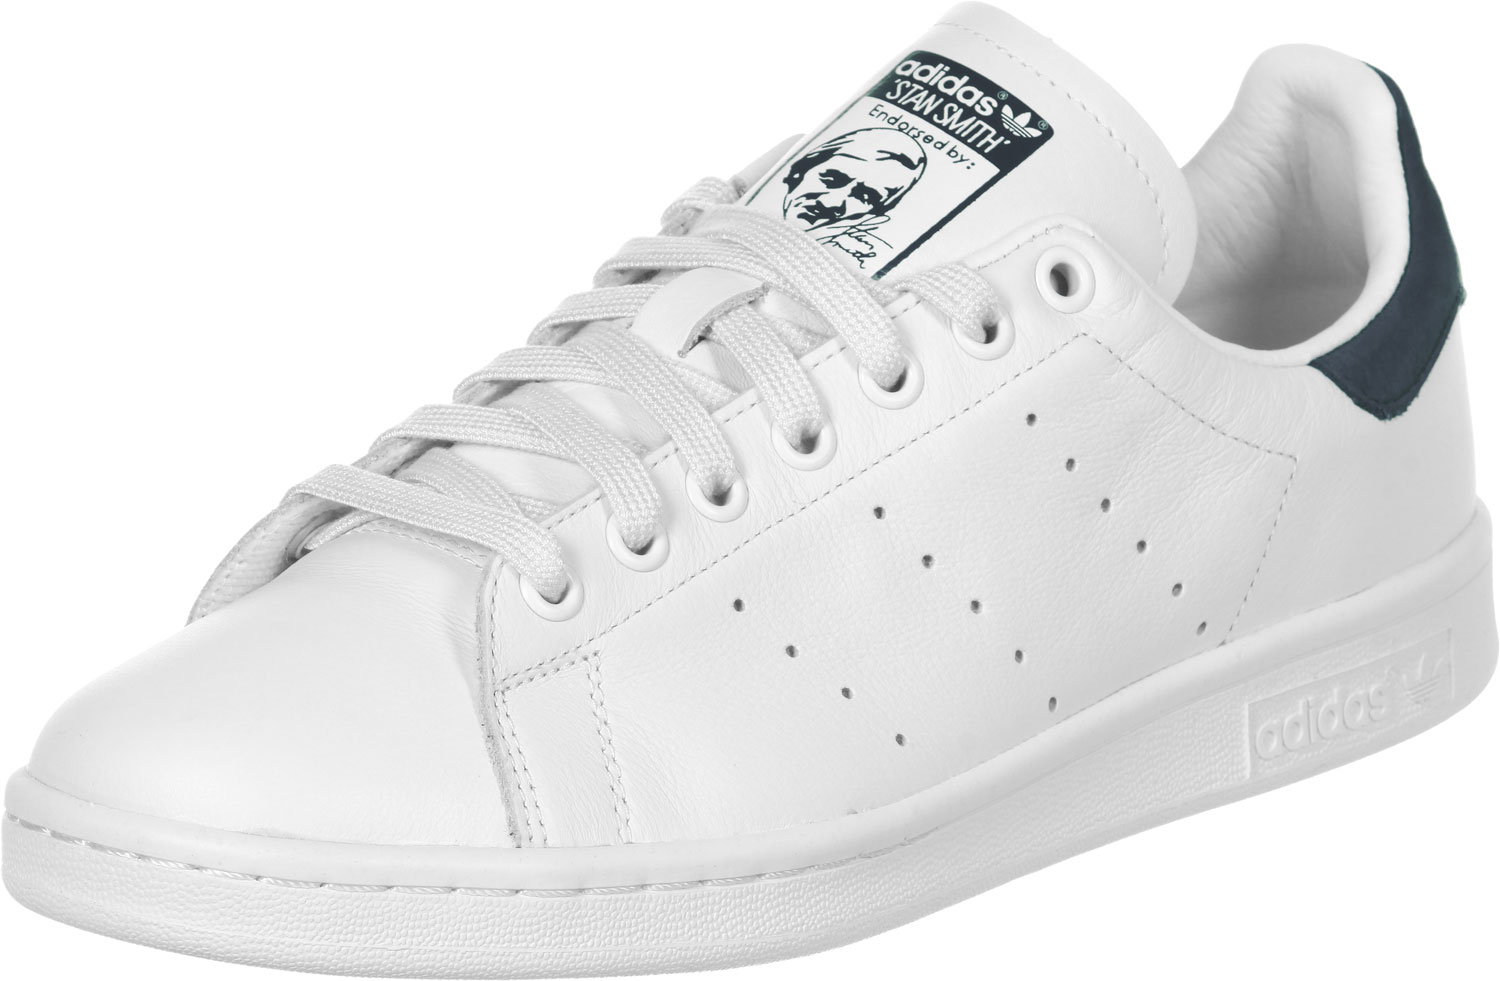 stan smith meaning